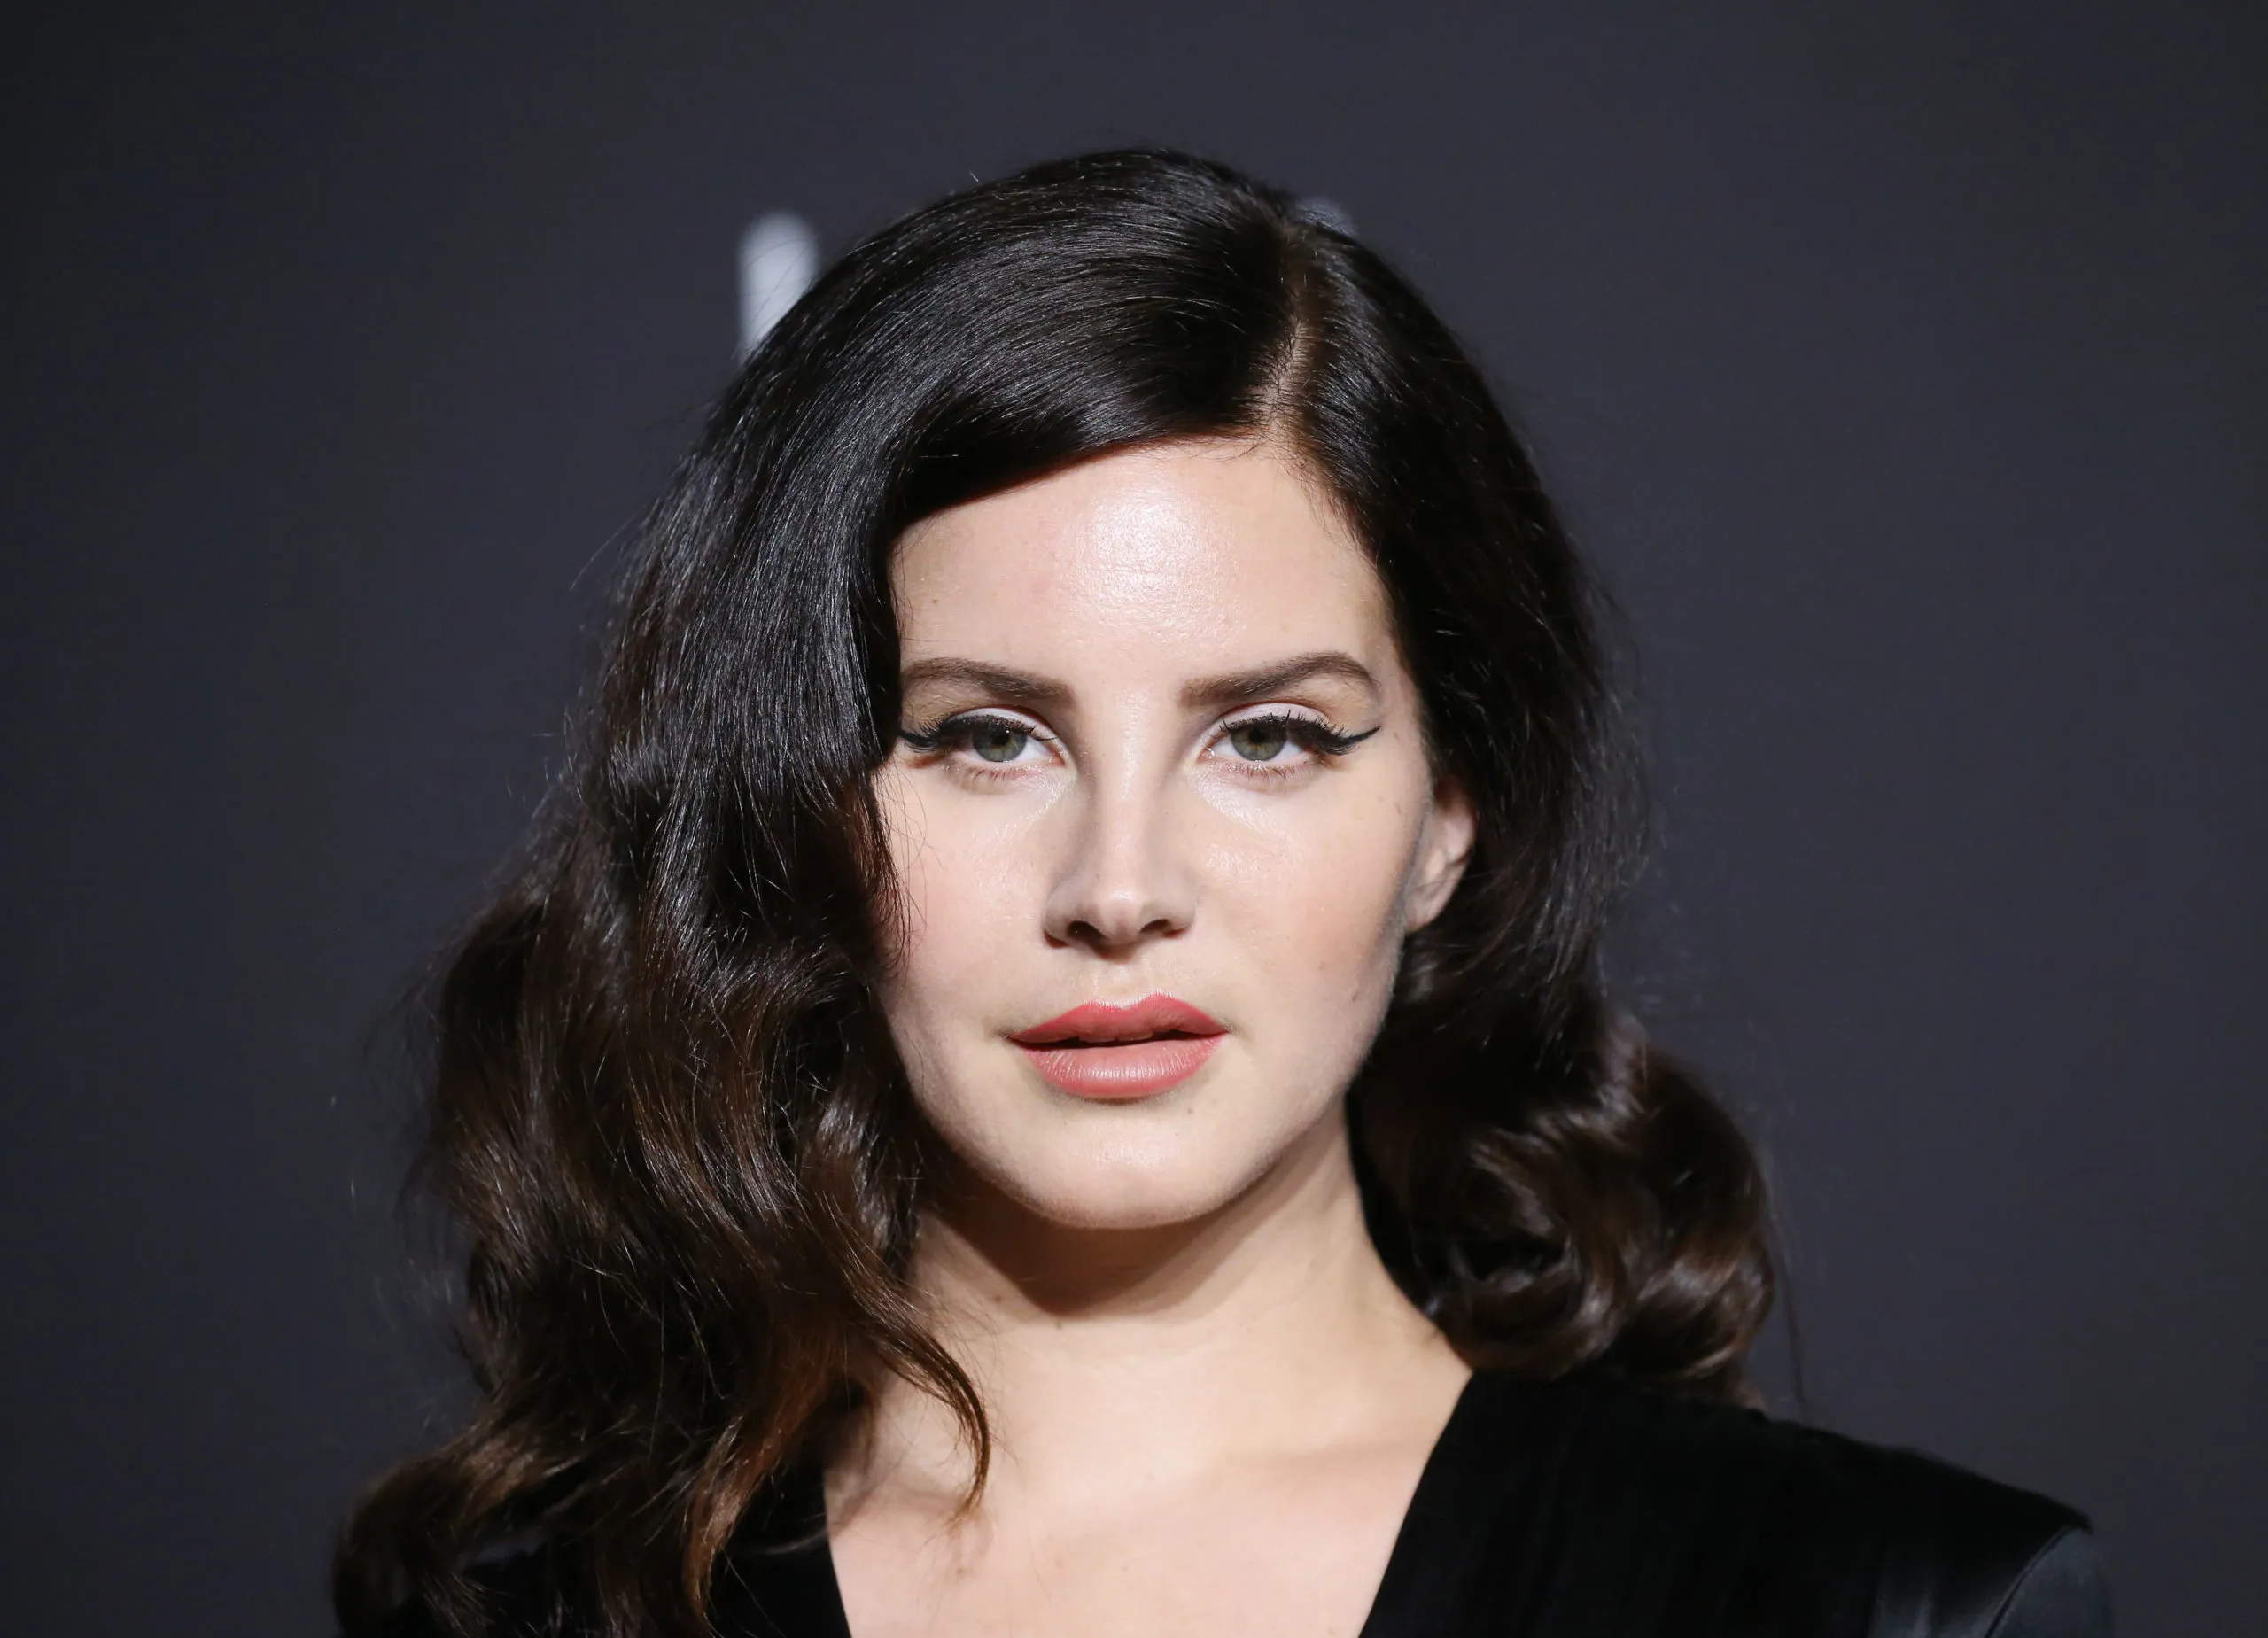 Lana Del Rey confirms new album and sparks debate about female artists